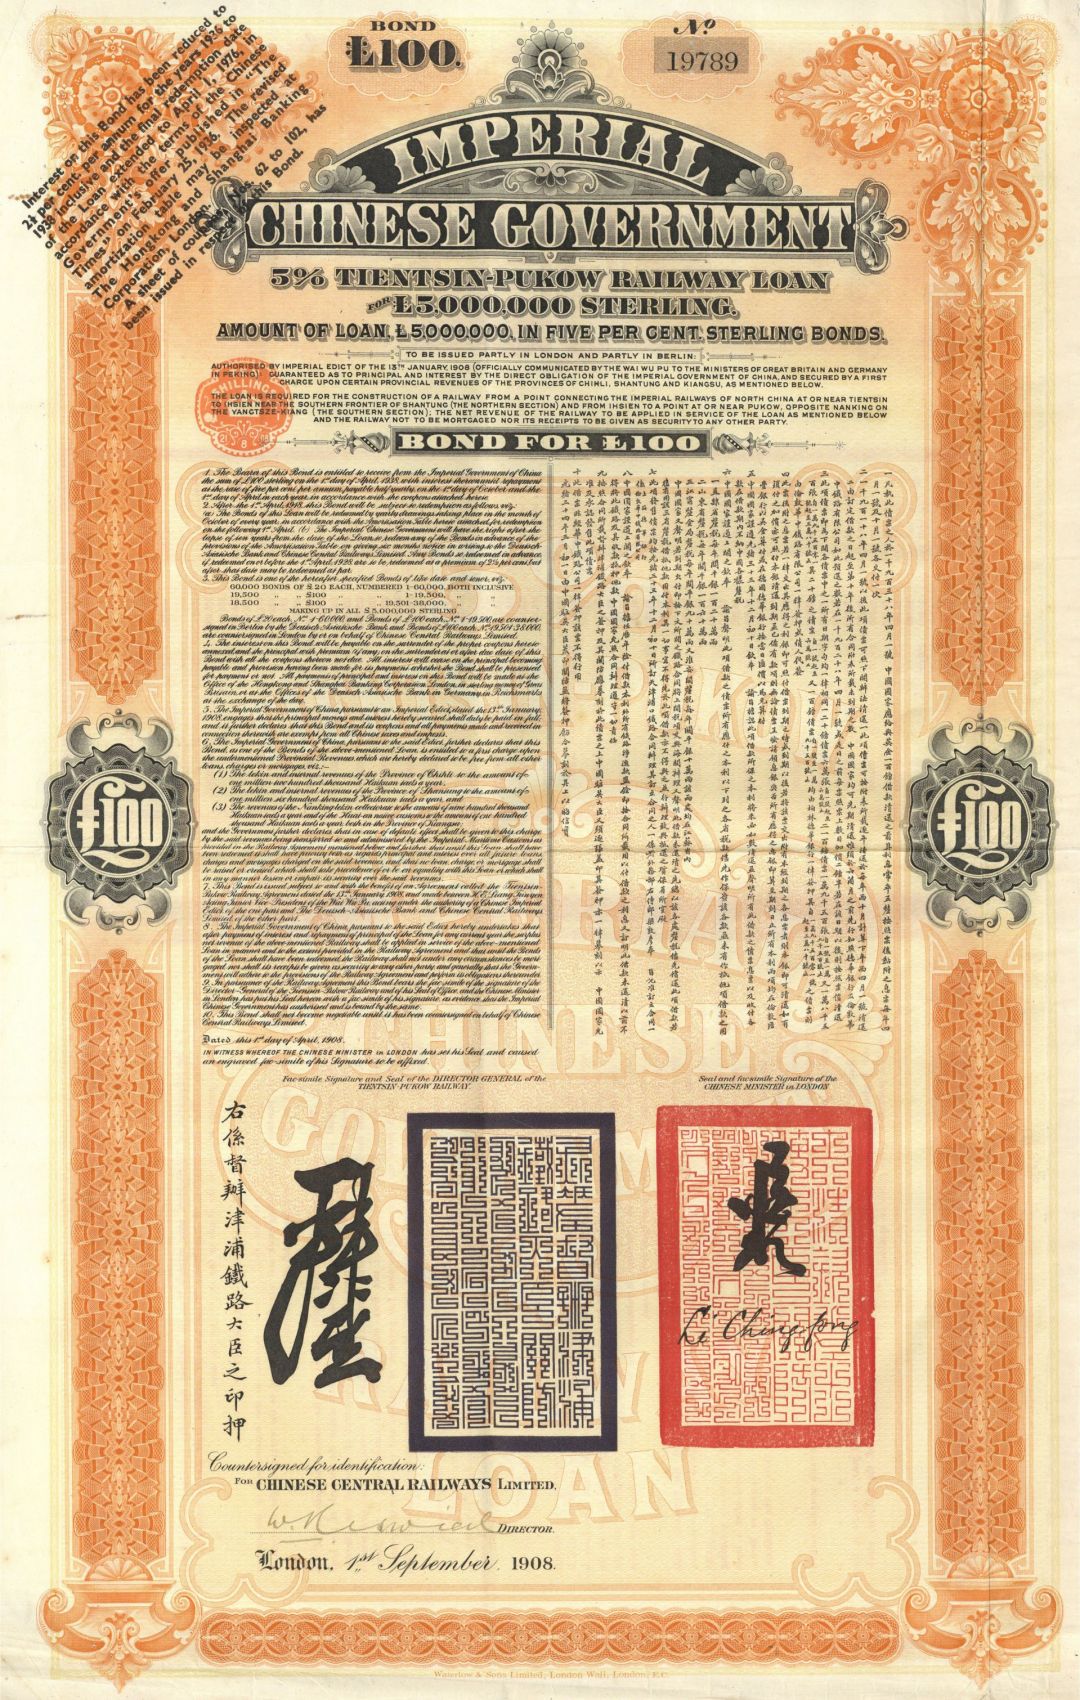 £100 Imperial Chinese Government 5% Tientsin-Pukow Railway Loan 1908 Uncanceled Gold Bond - China